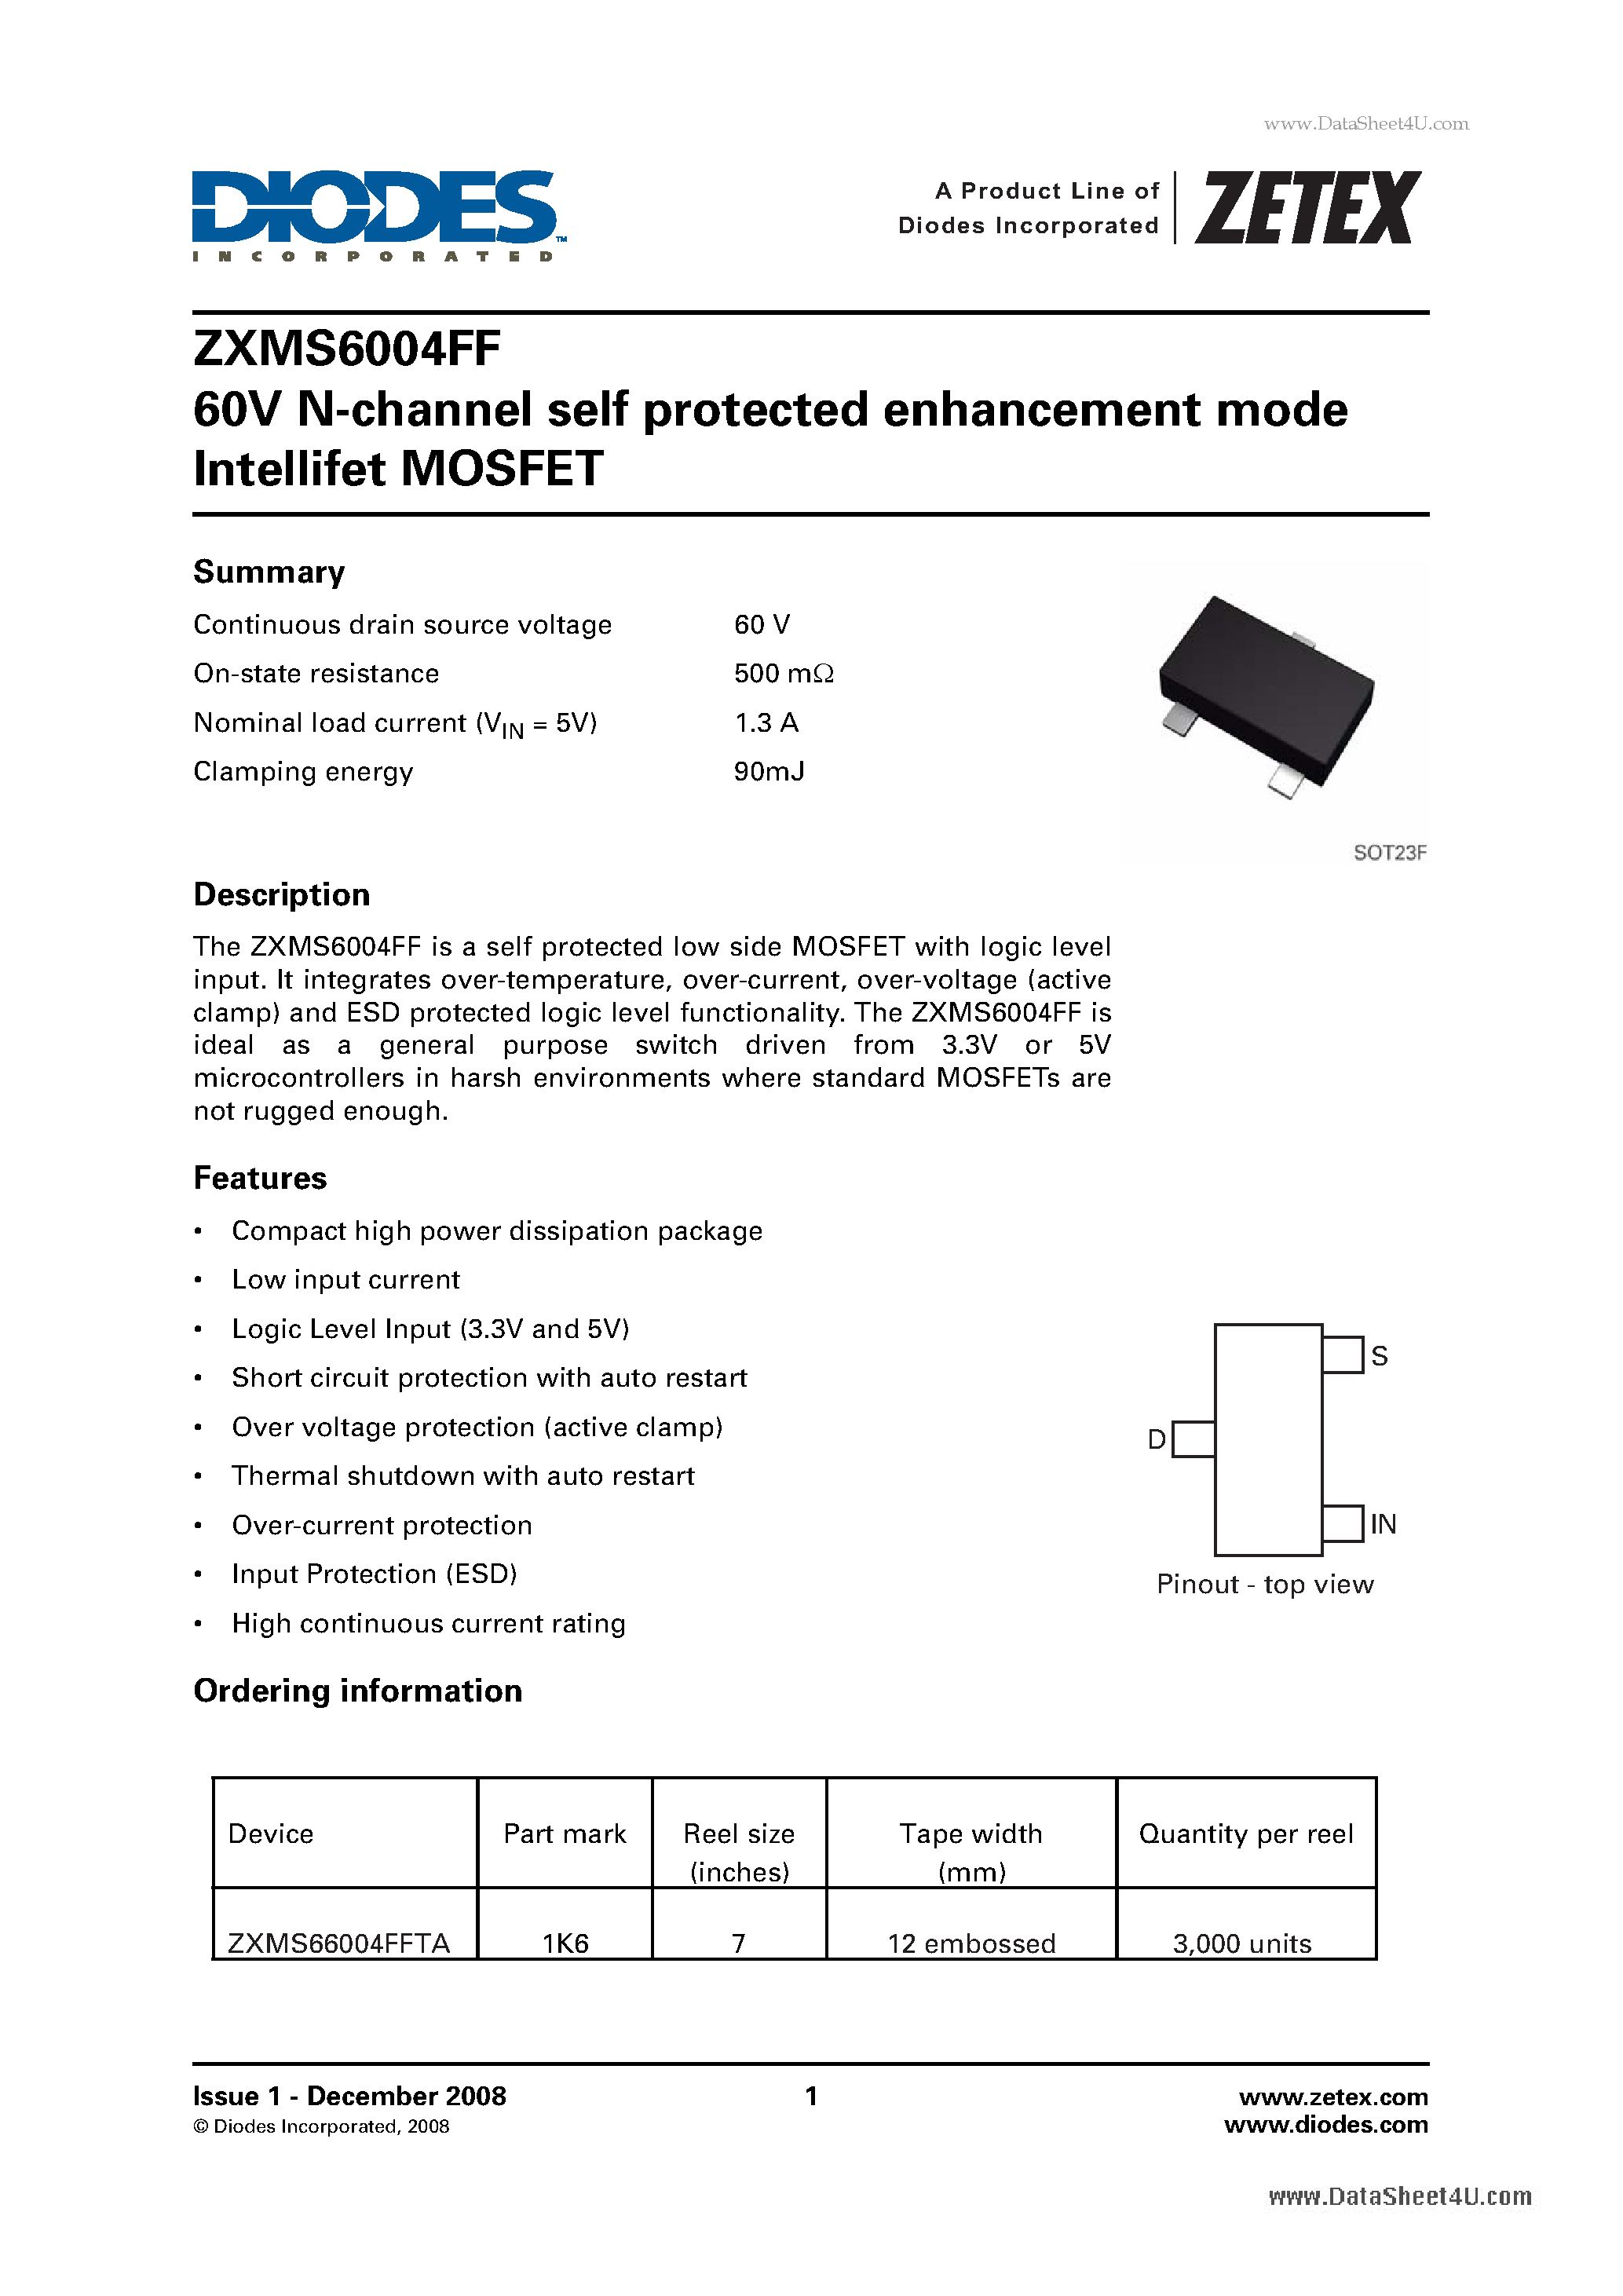 Datasheet ZXMS6004FF - 60V N-channel self protected enhancement mode Intellifet MOSFET page 1